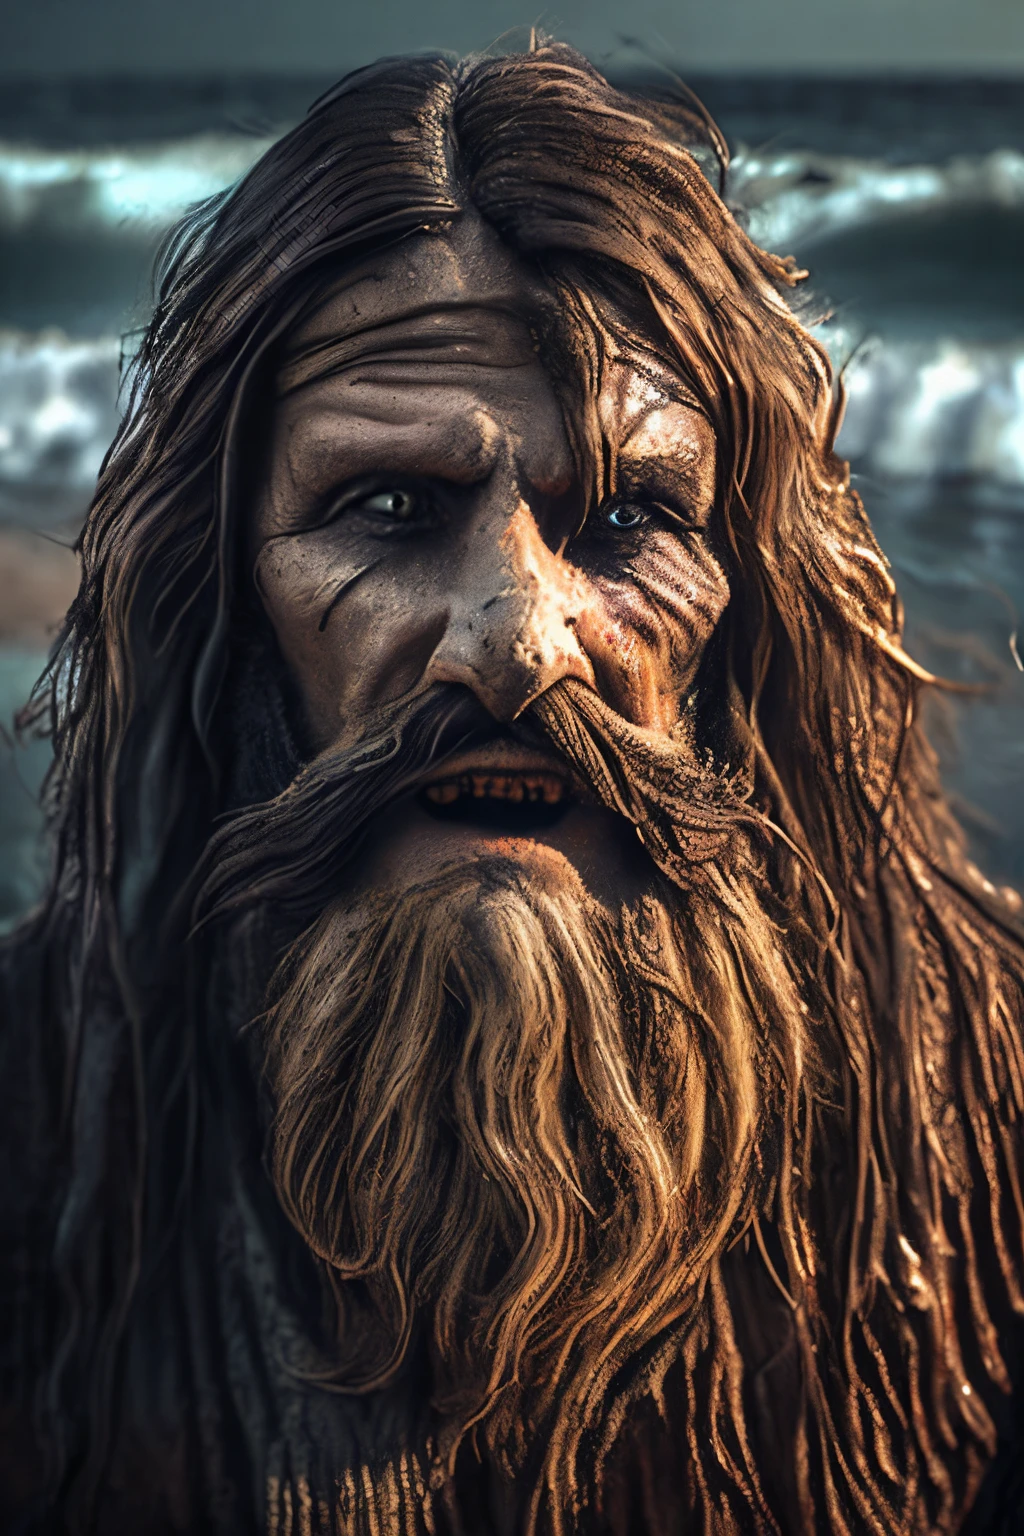 (extremely detailed 8k wallpaper), Dark Theme, Modern Horror, ((Sea creature mes (torn and aged pirate clothes.), fine focus, (subsurface dispersion:1.1), (Middle-aged man), (Brown long hair), (Beard) ((Completely Wet)), centered face, dramatic lighting, expression (serious), On a beach, coming out of the sea.